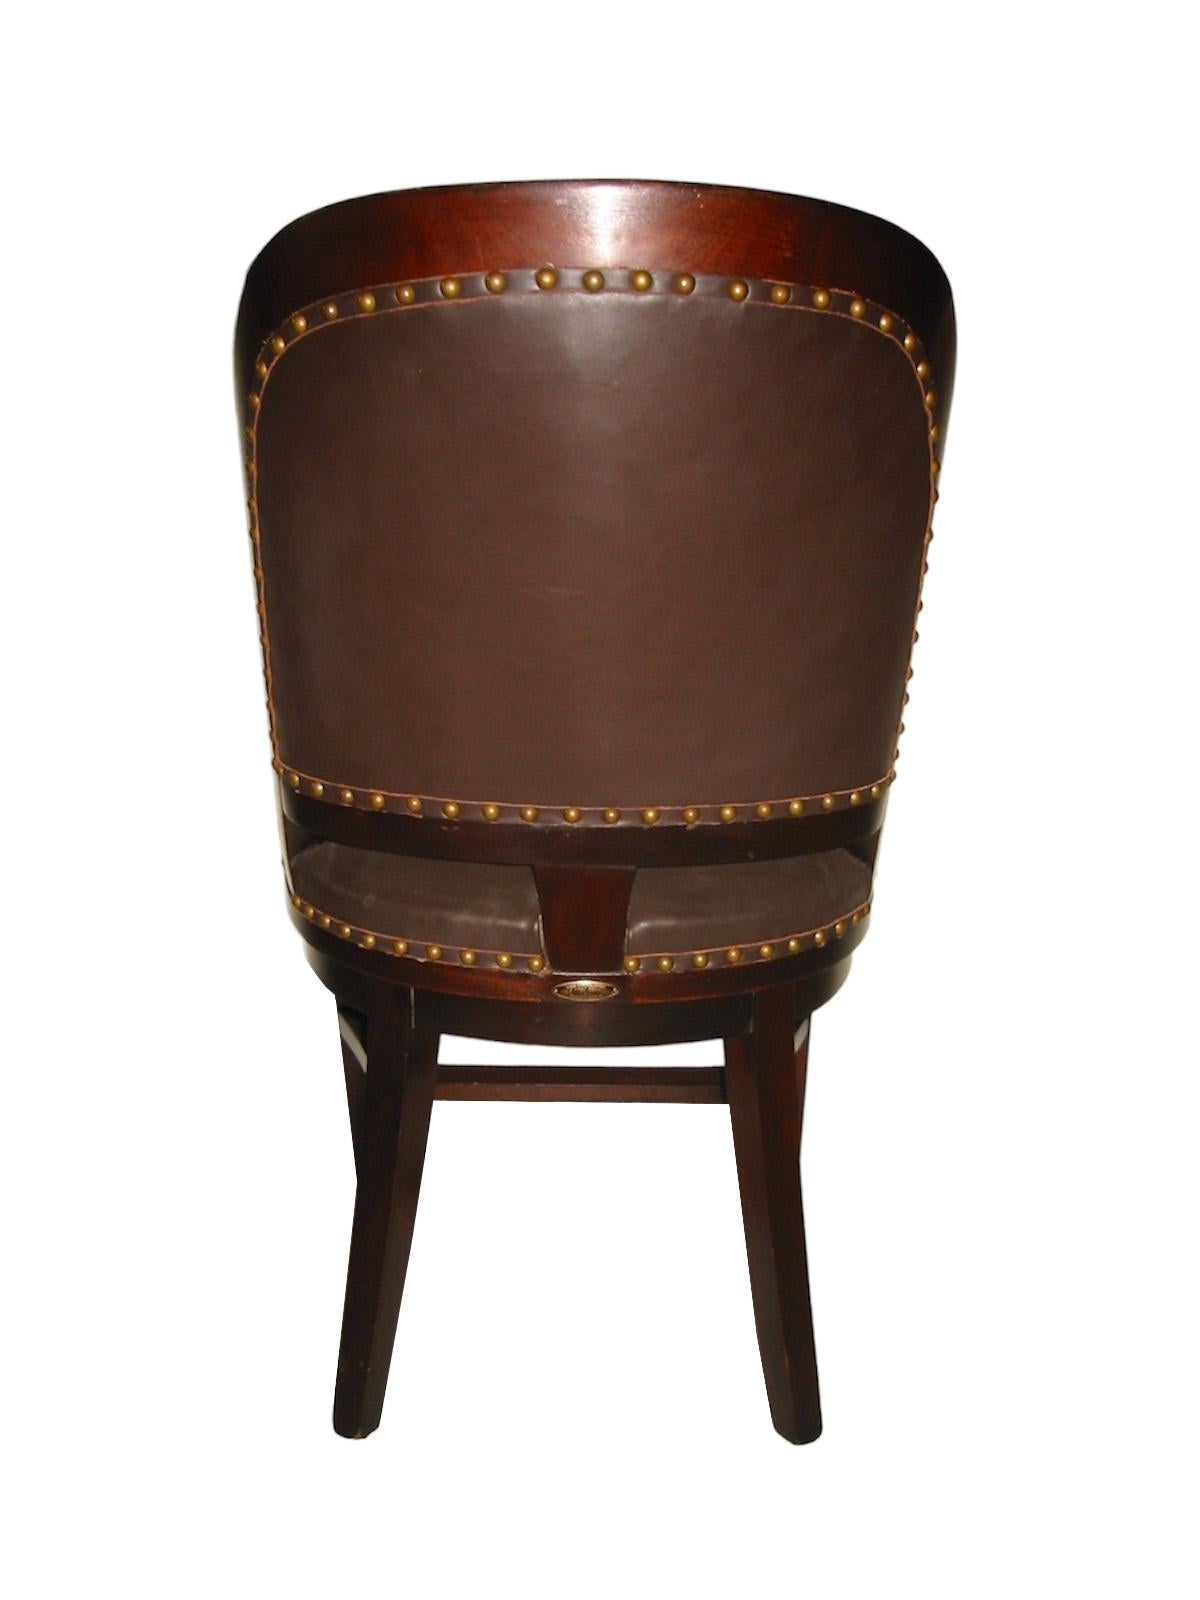 19th Century Leather Bank Chair - Original Upholstery In Good Condition For Sale In New York, NY